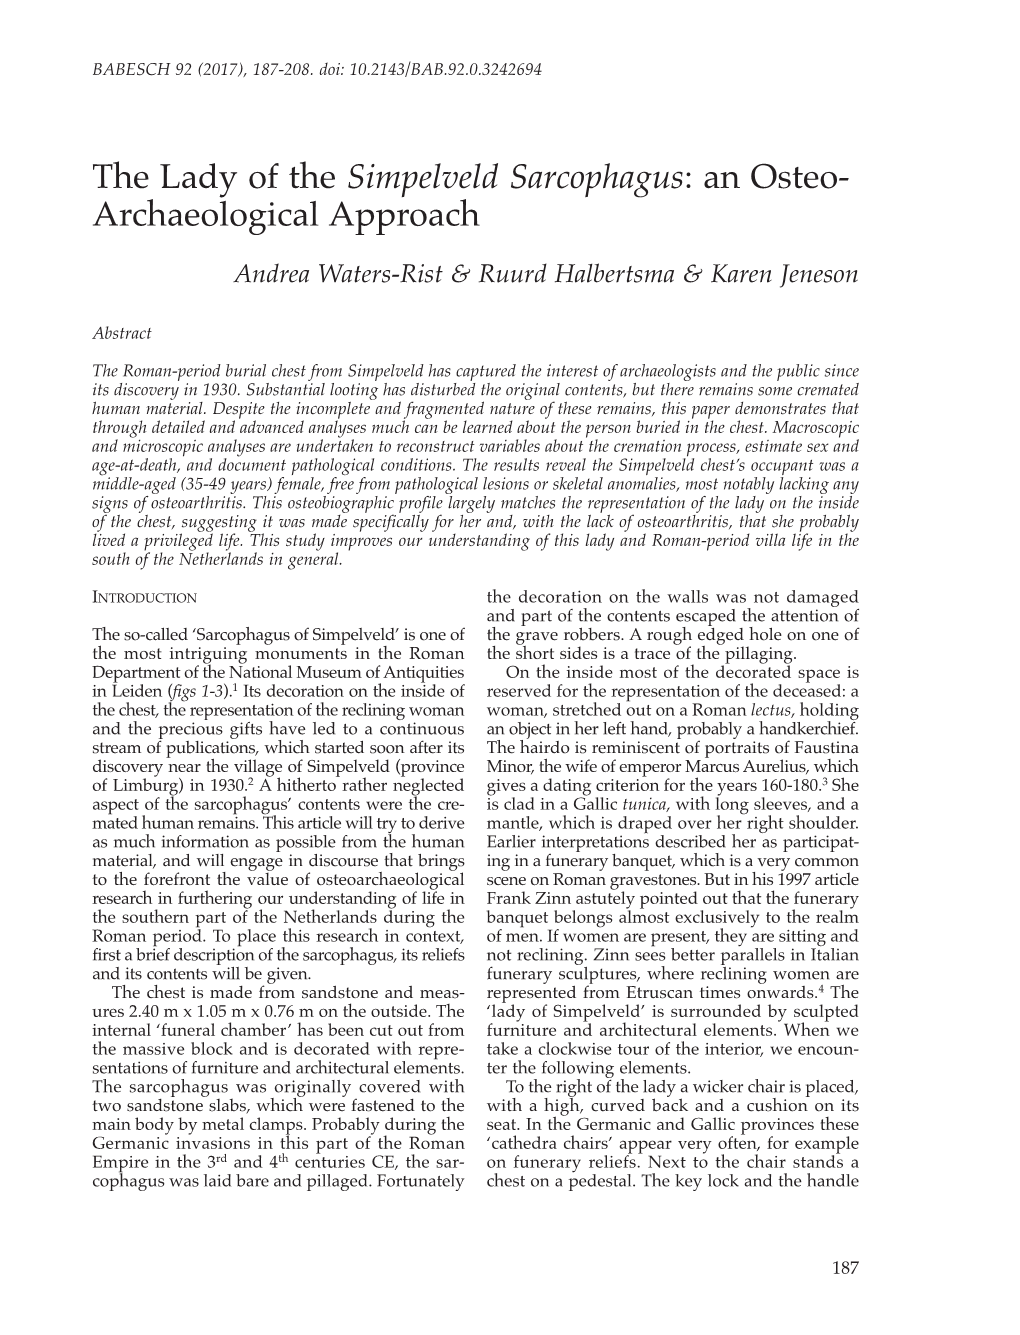 The Lady of the Simpelveld Sarcophagus: an Osteo- Archaeological Approach